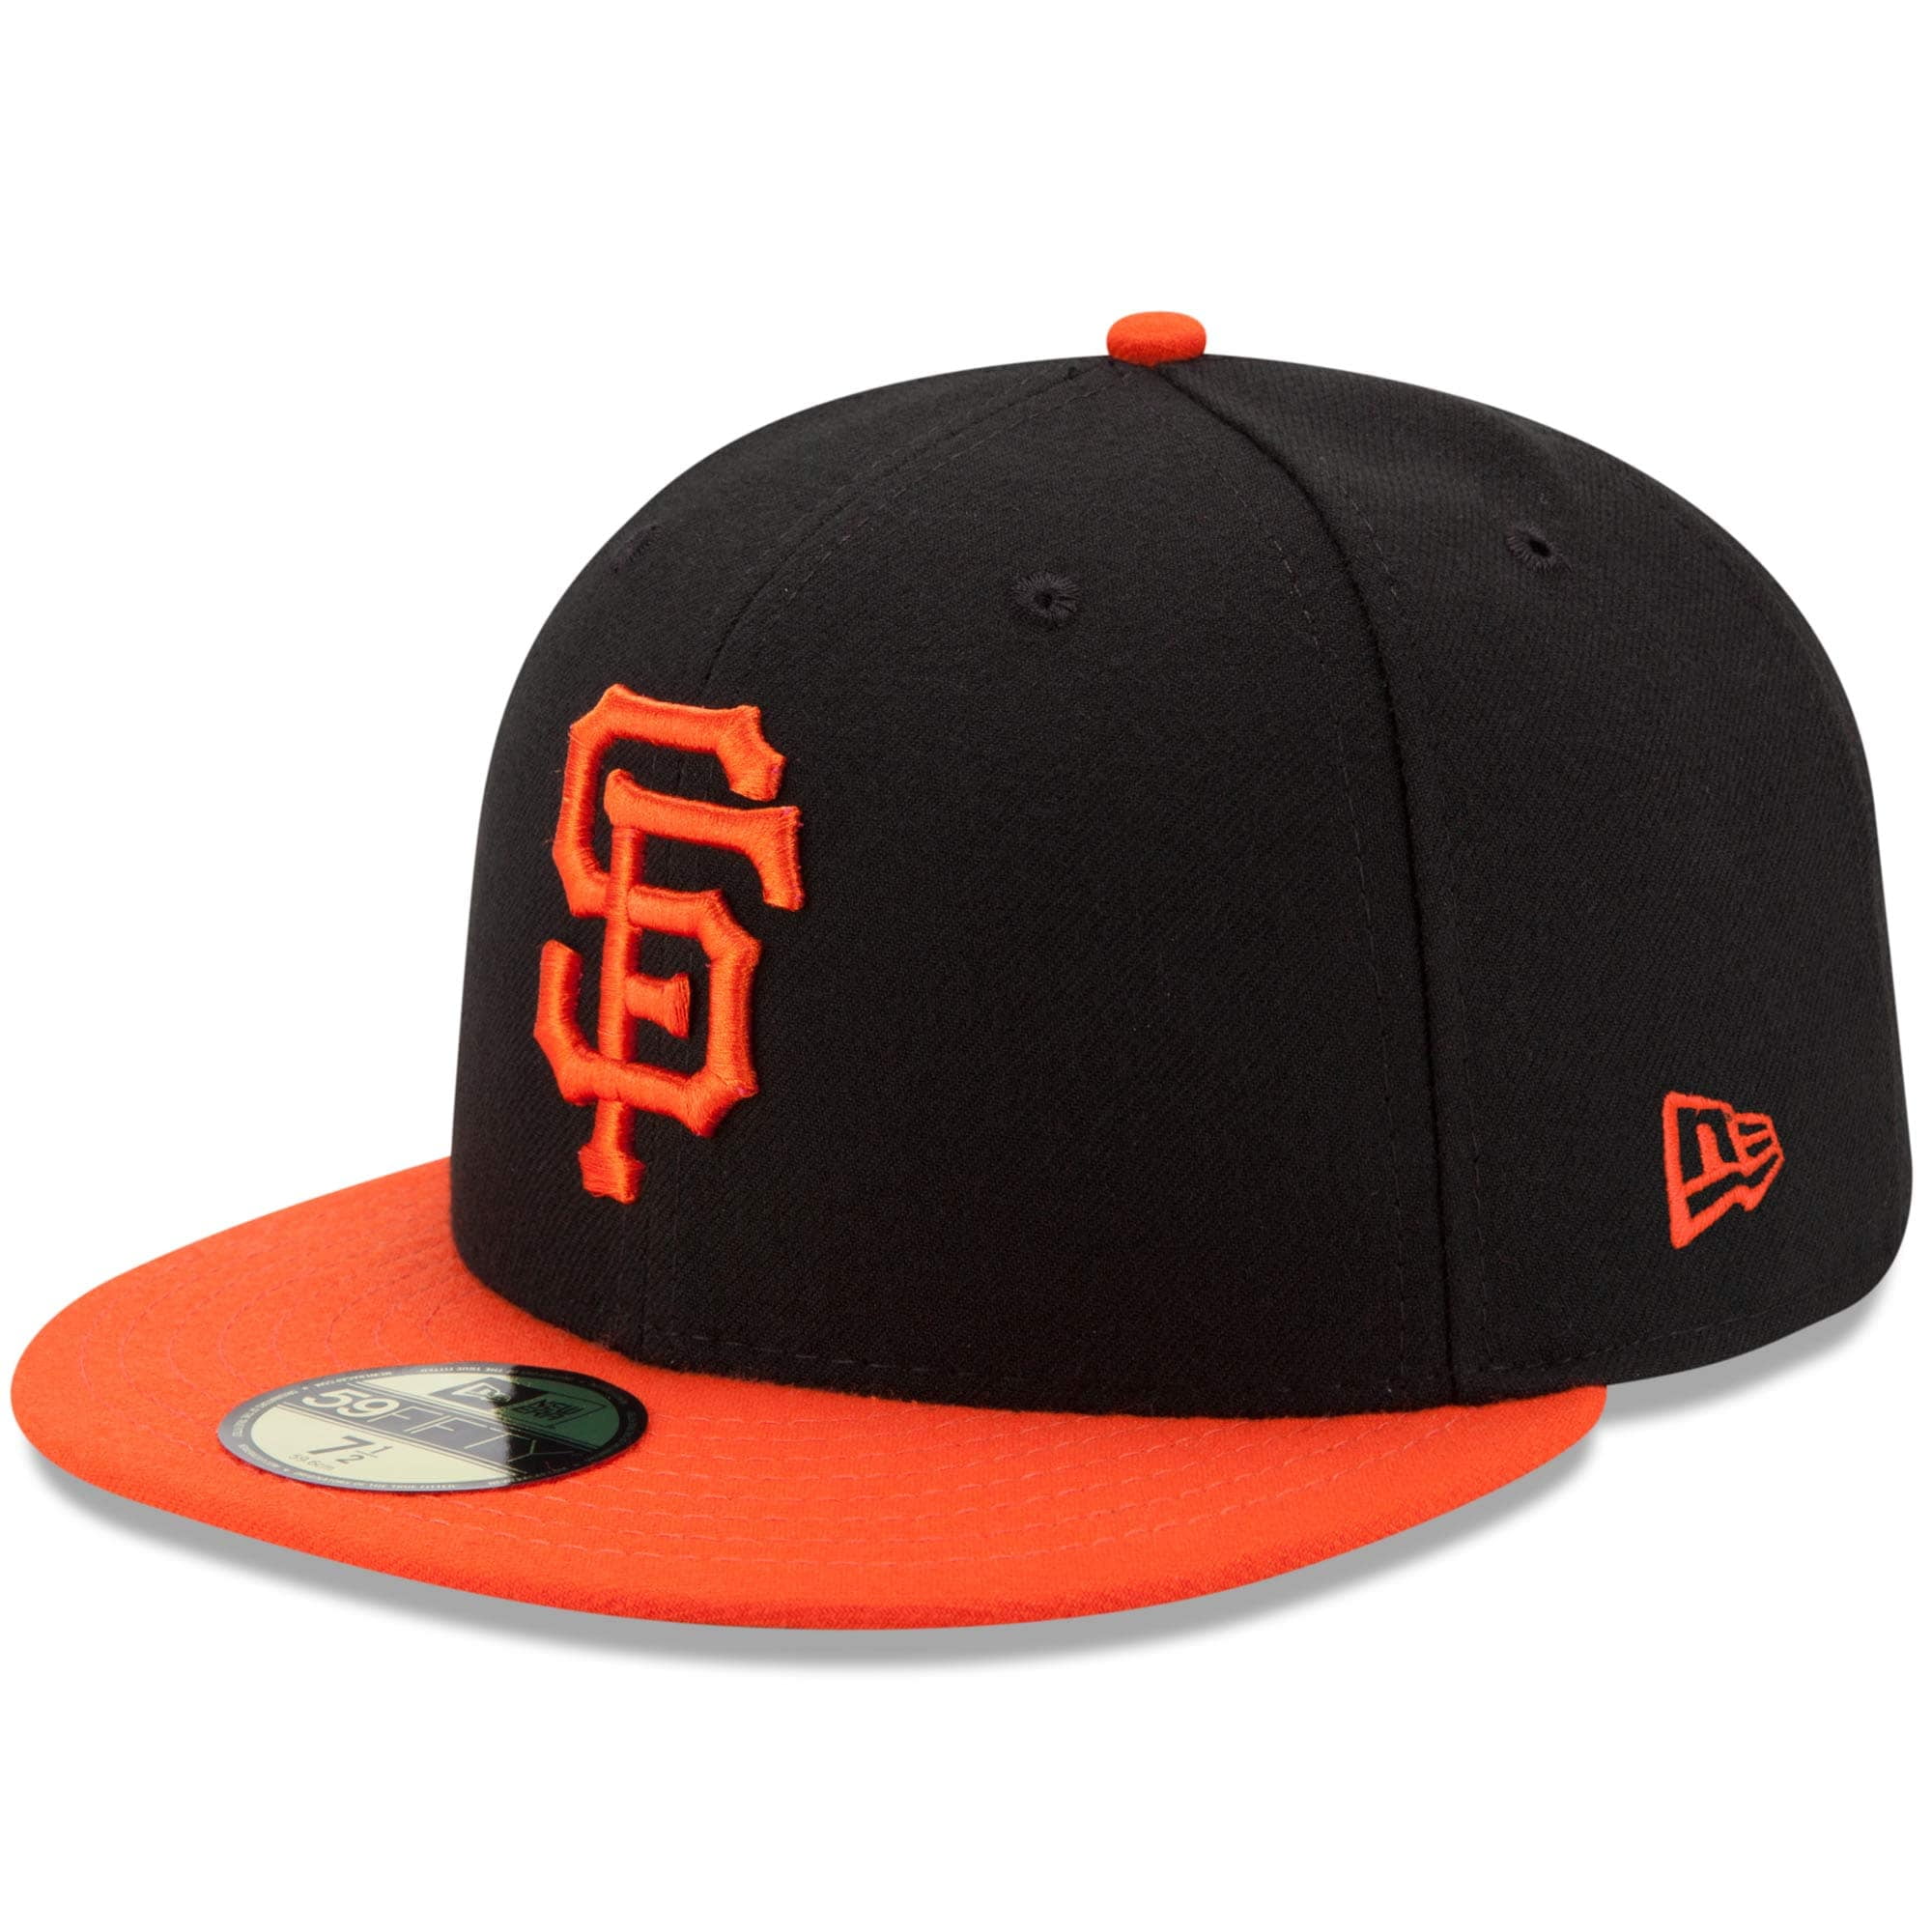 San Francisco Giants New Era Authentic Collection On Field 59fifty Fitted Hat Black Orange